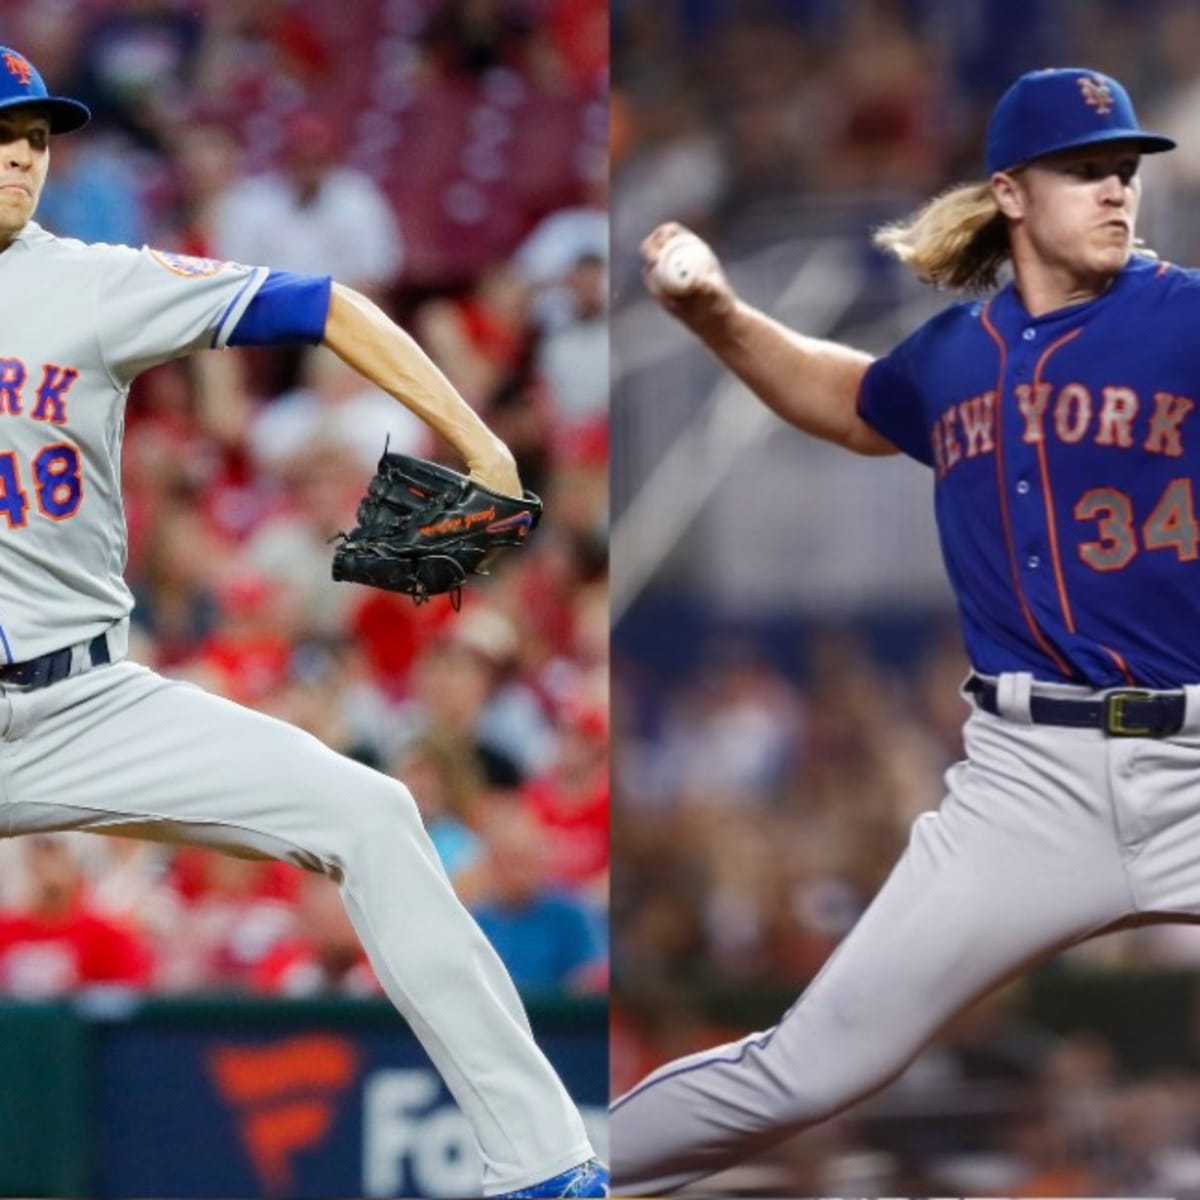 How Noah Syndergaard and Jacob deGrom Take Care of Their Epic Hair